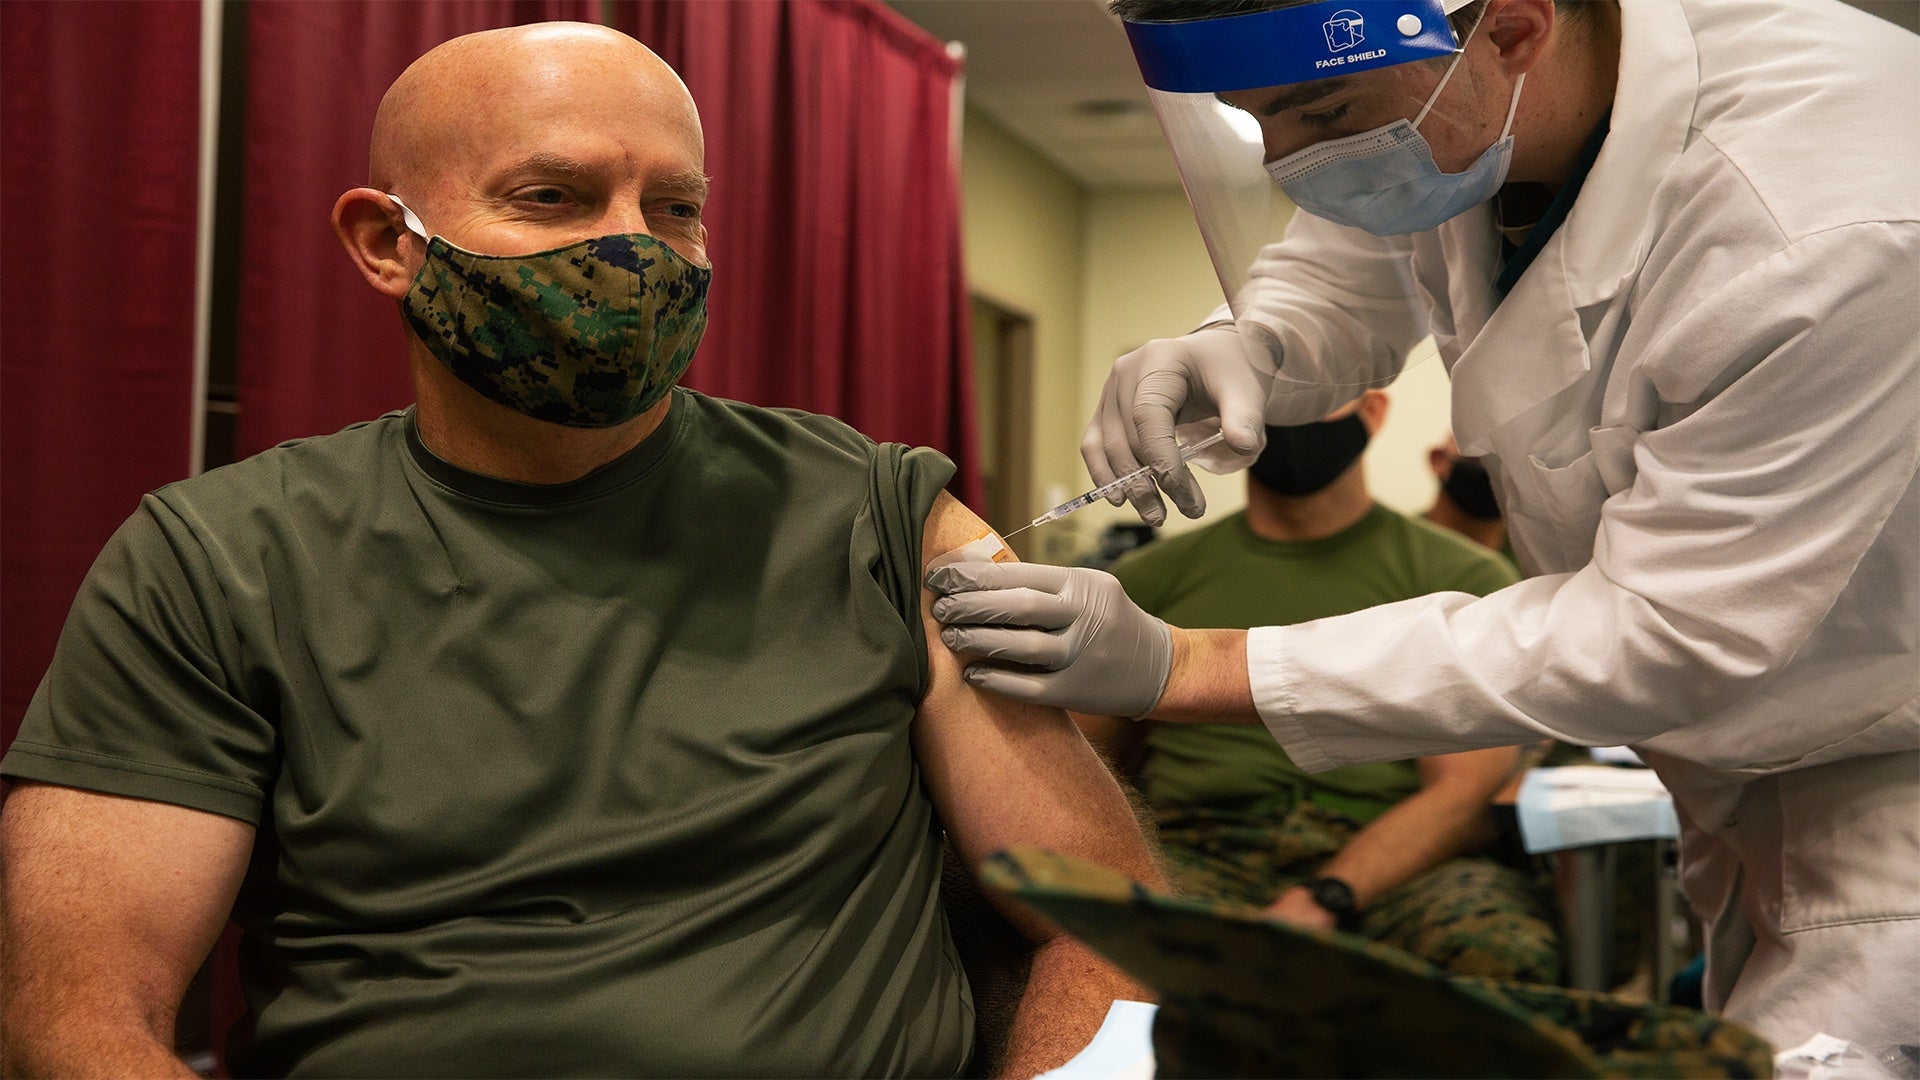 Commandant of the Marine Corps Gen. David H. Berger receives the COVID-19 vaccine as part of Operation Warp Speed at Walter Reed National Military Medical Center, Maryland, Dec 22, 2020. (Lance Cpl. Tyler W. Abbott/U.S. Marine Corps)